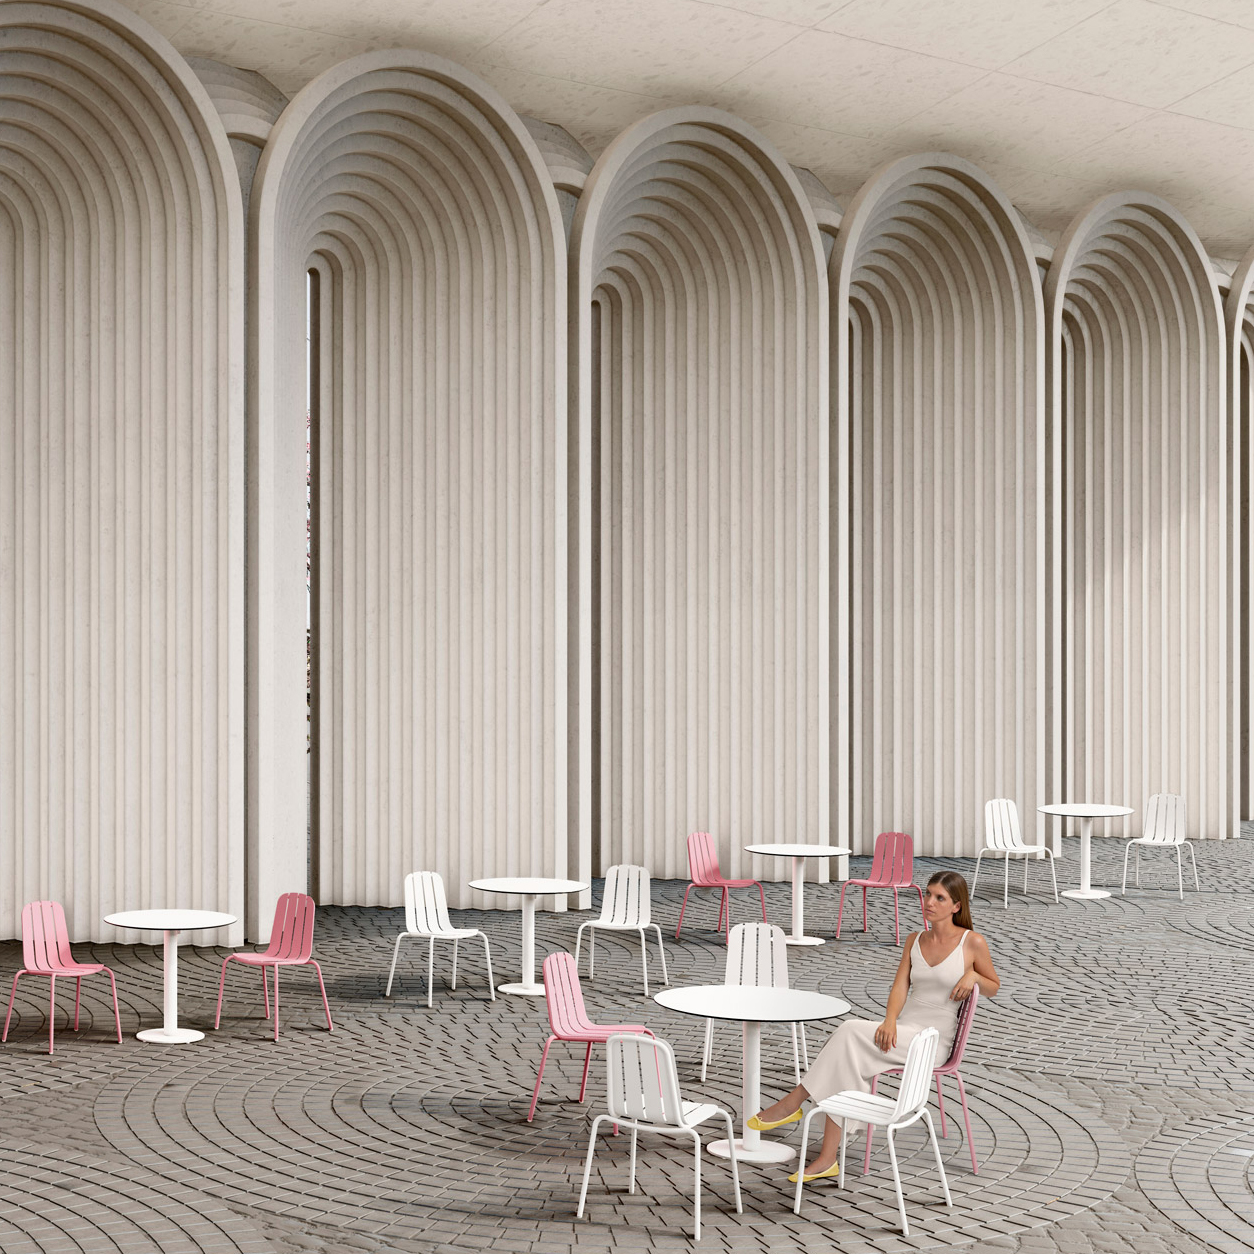 Models sitting on white and pink chairs in front of curved archways